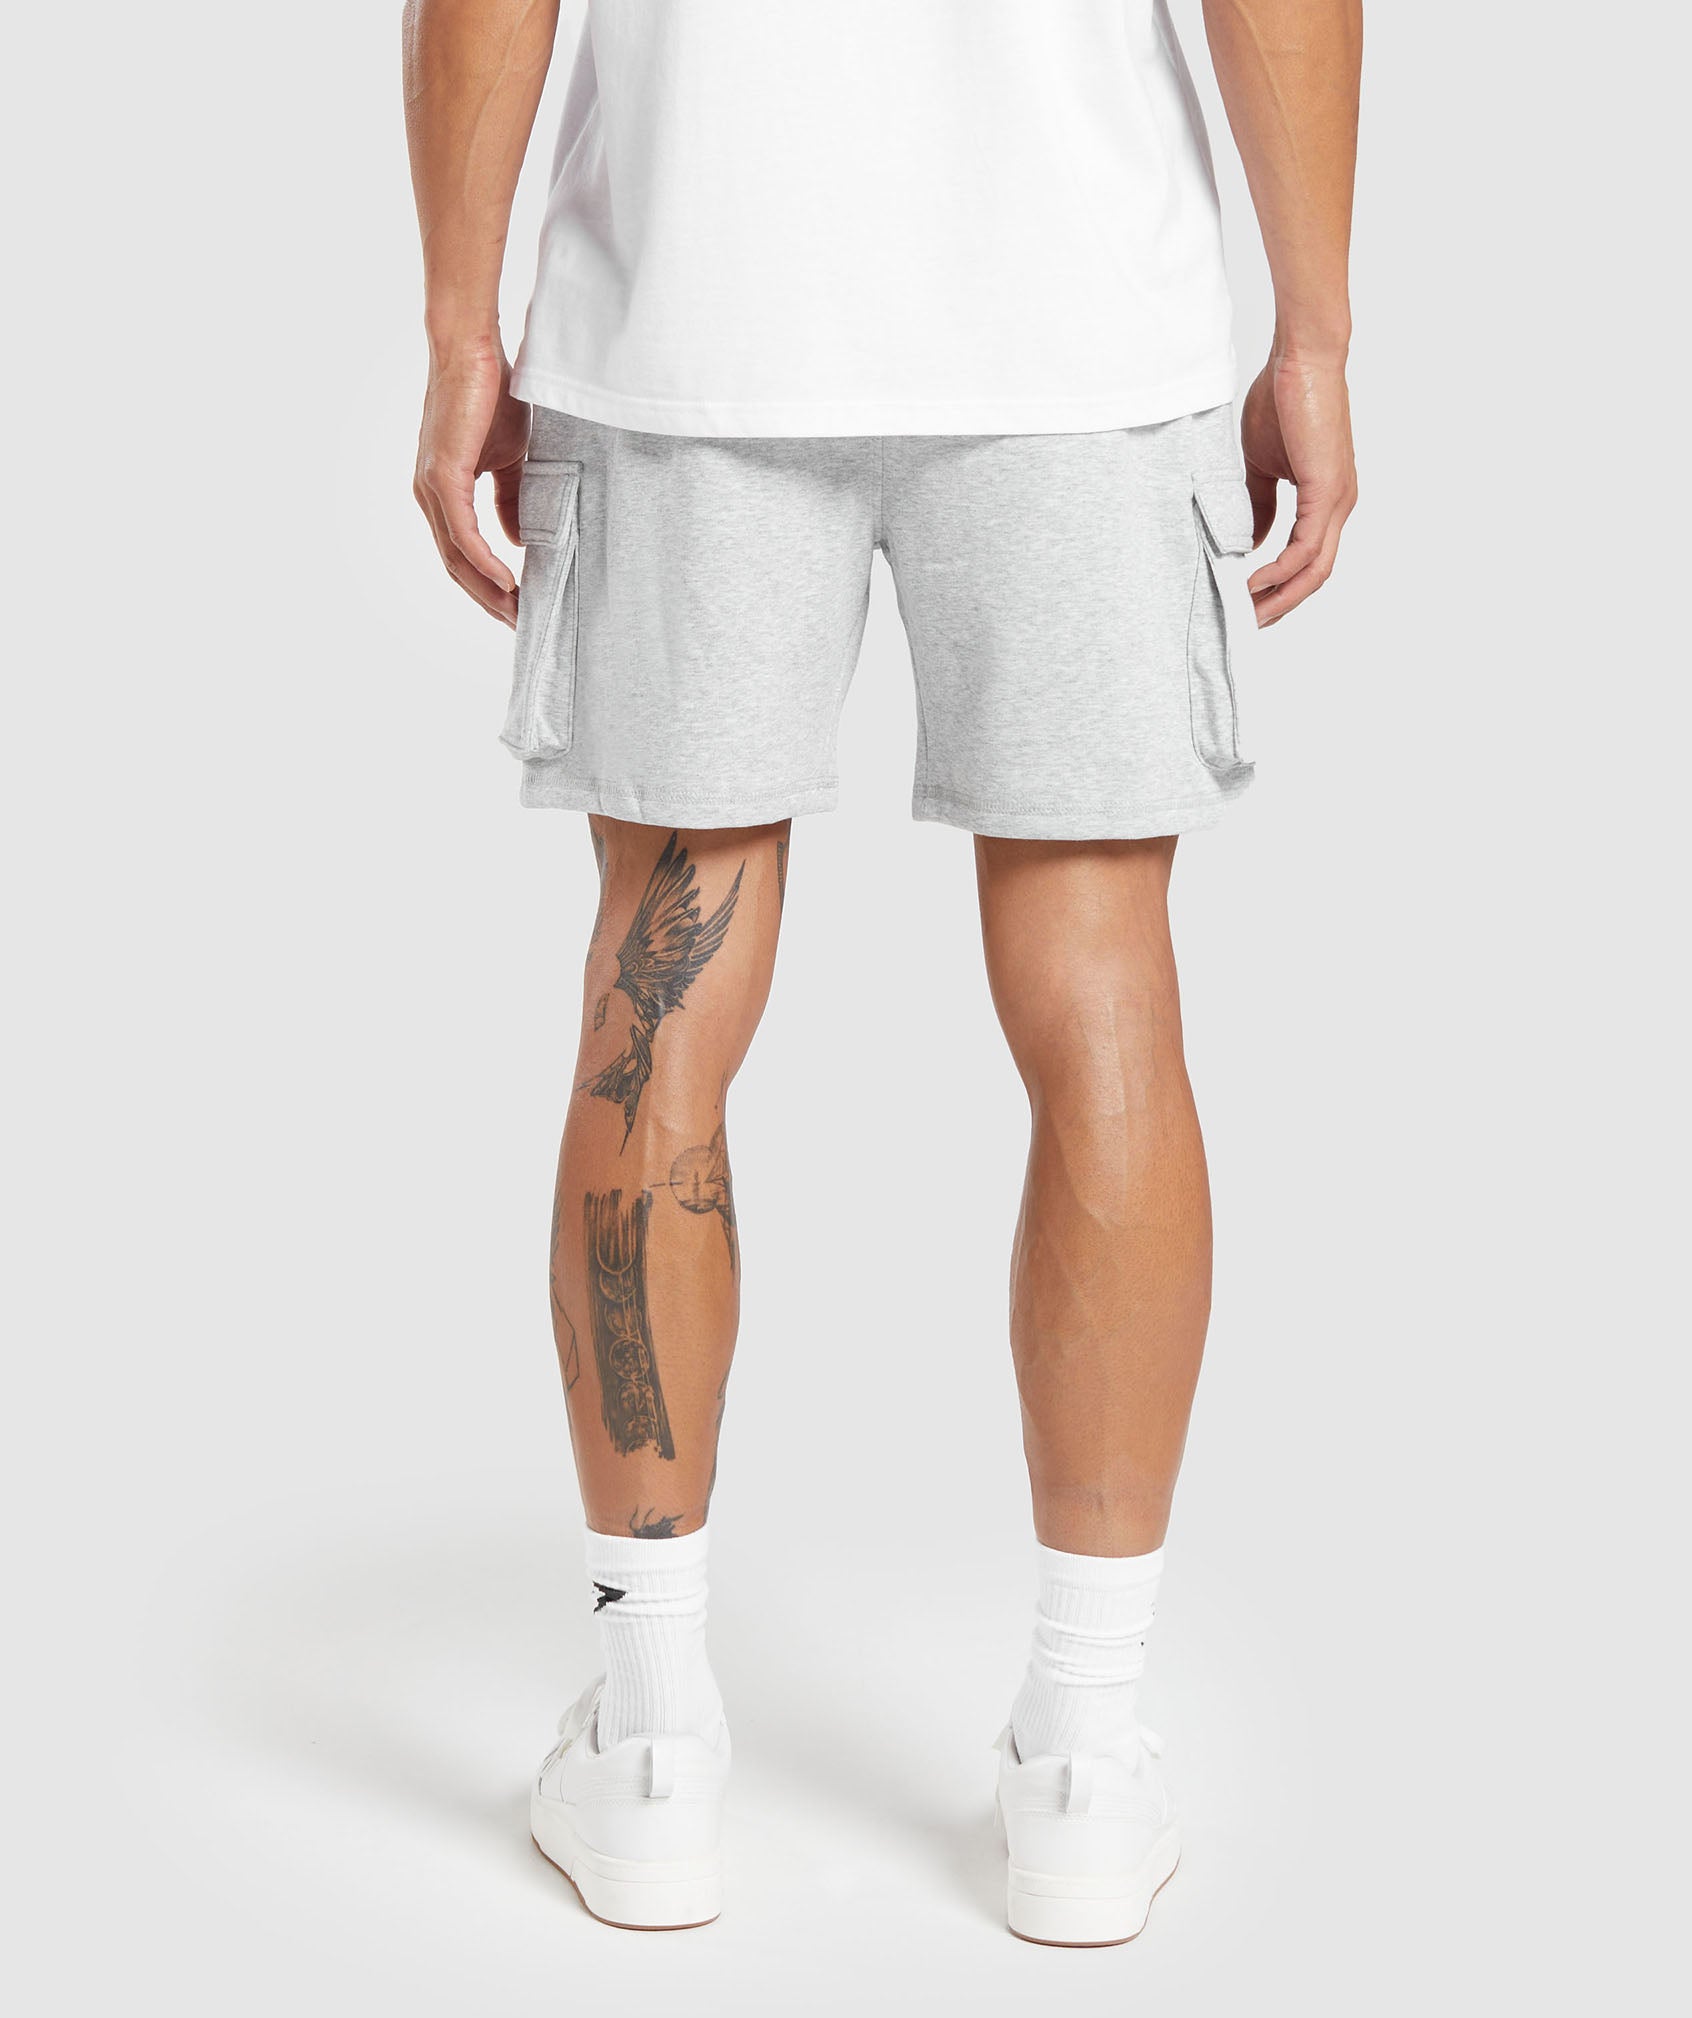 Crest Cargo Shorts in Light Grey Marl - view 3